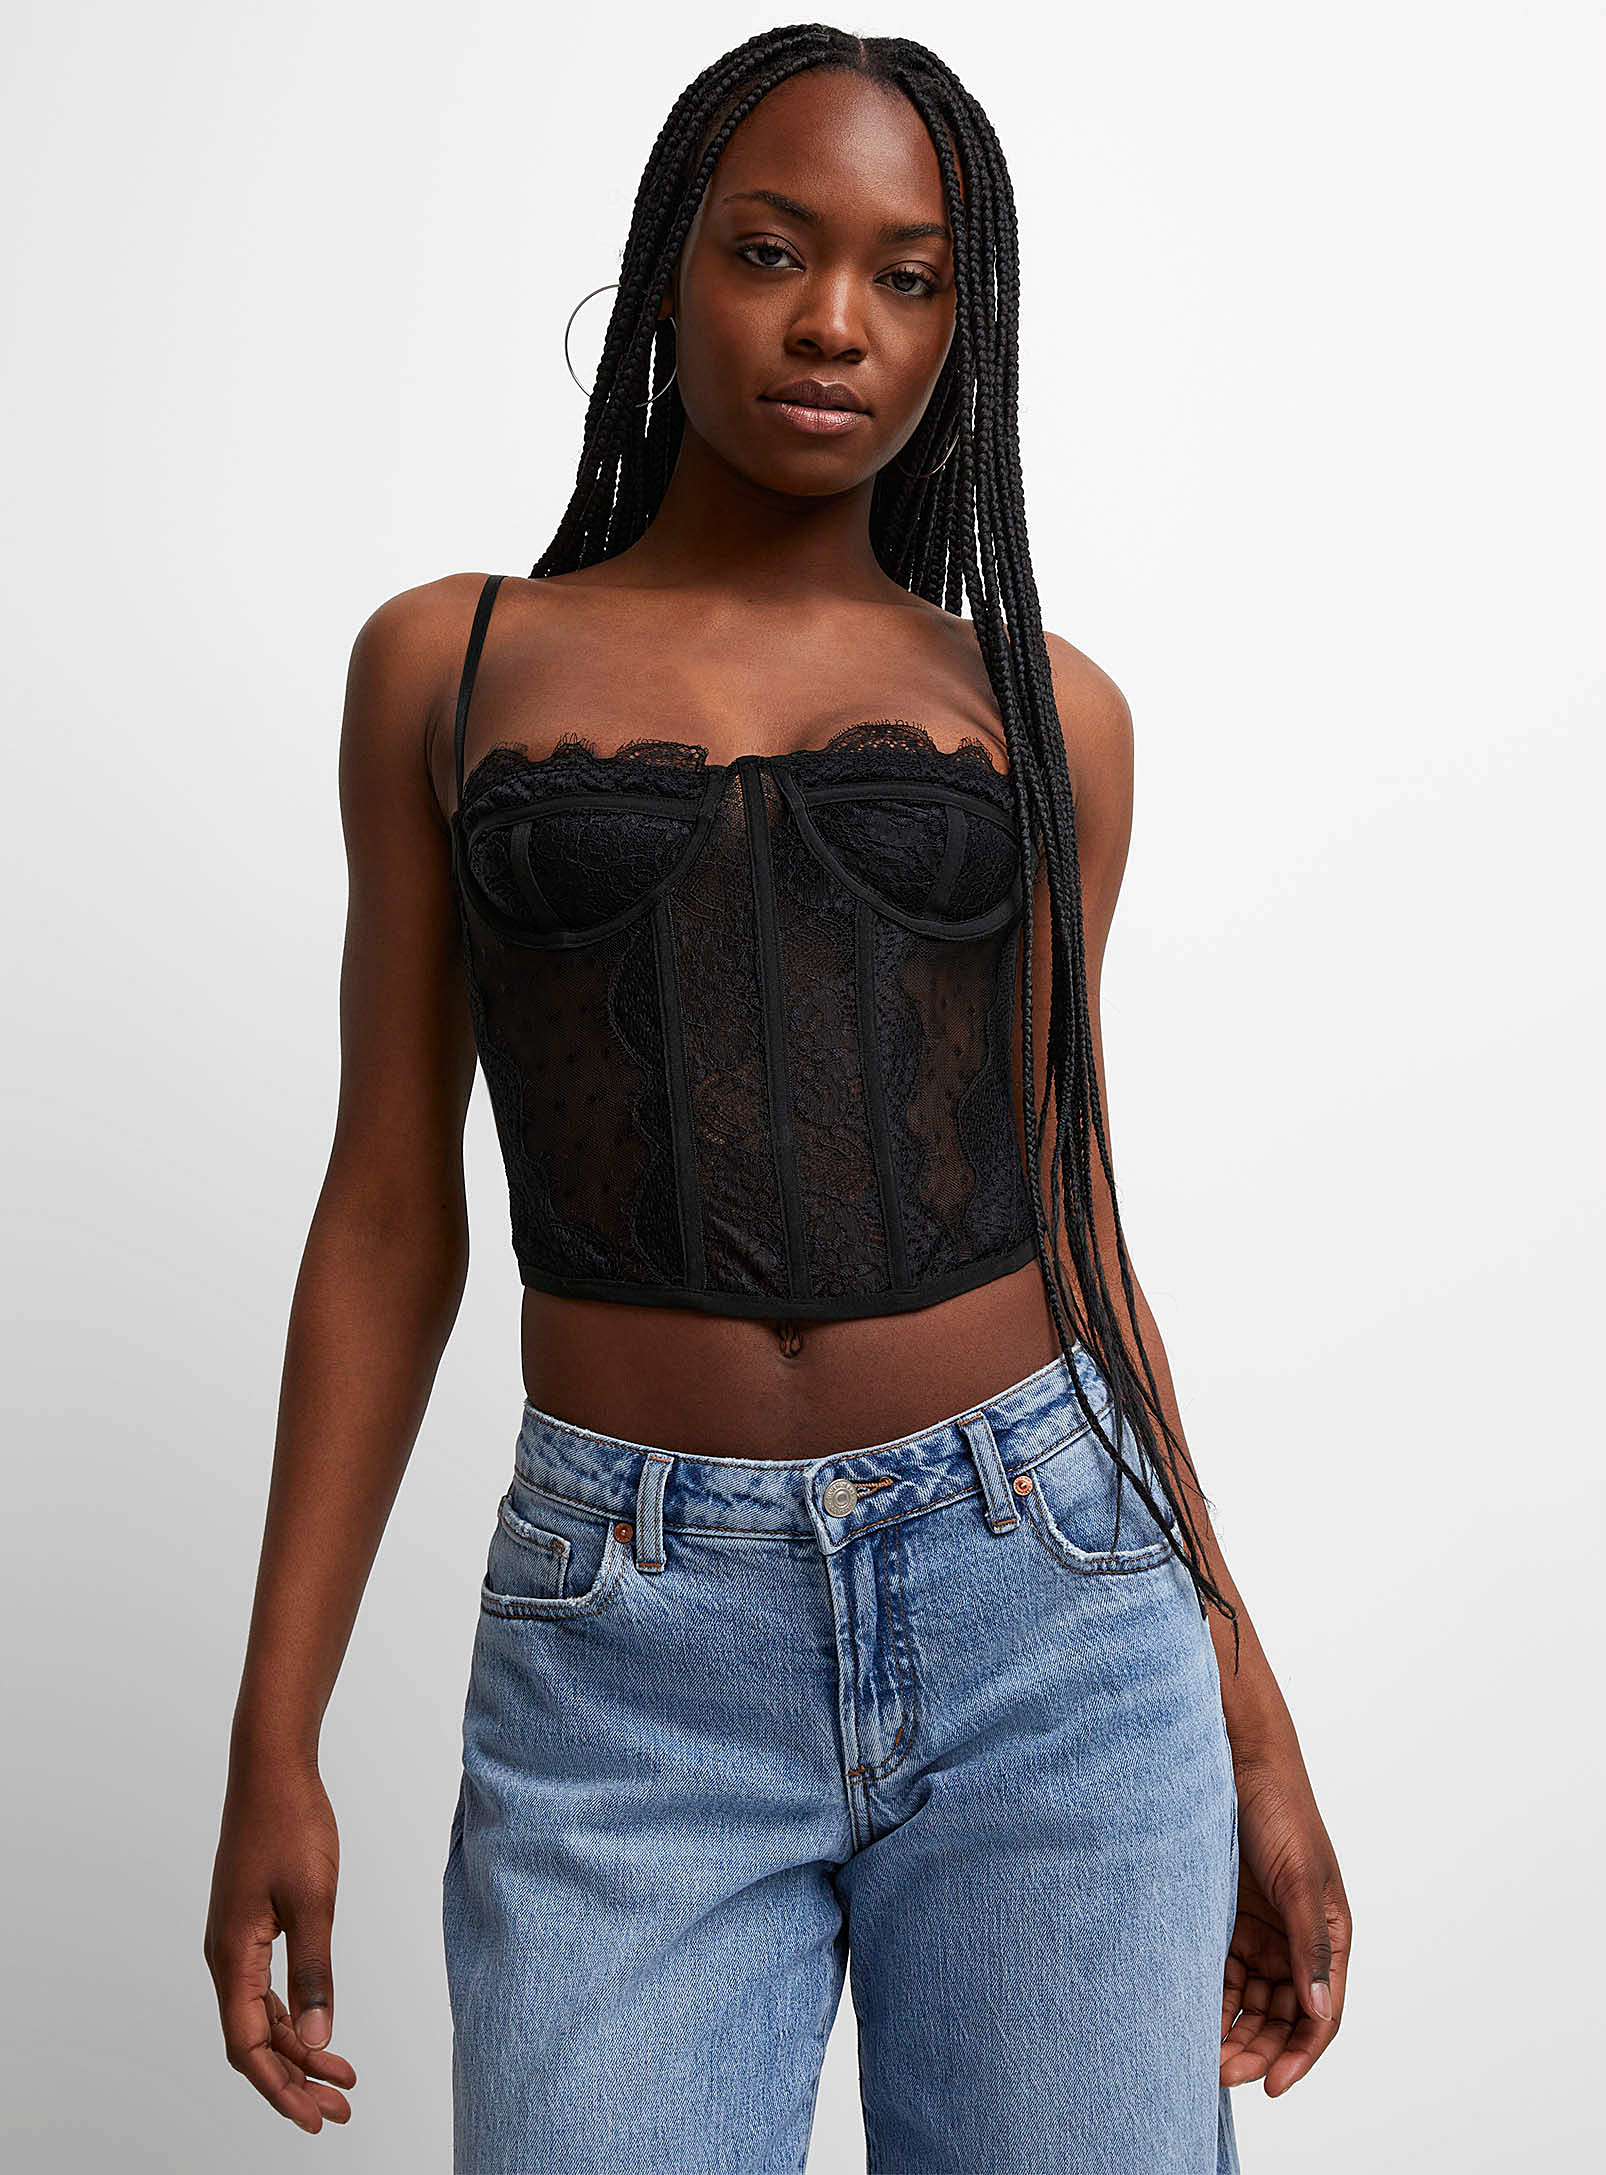 Icone Black Lace Bustier